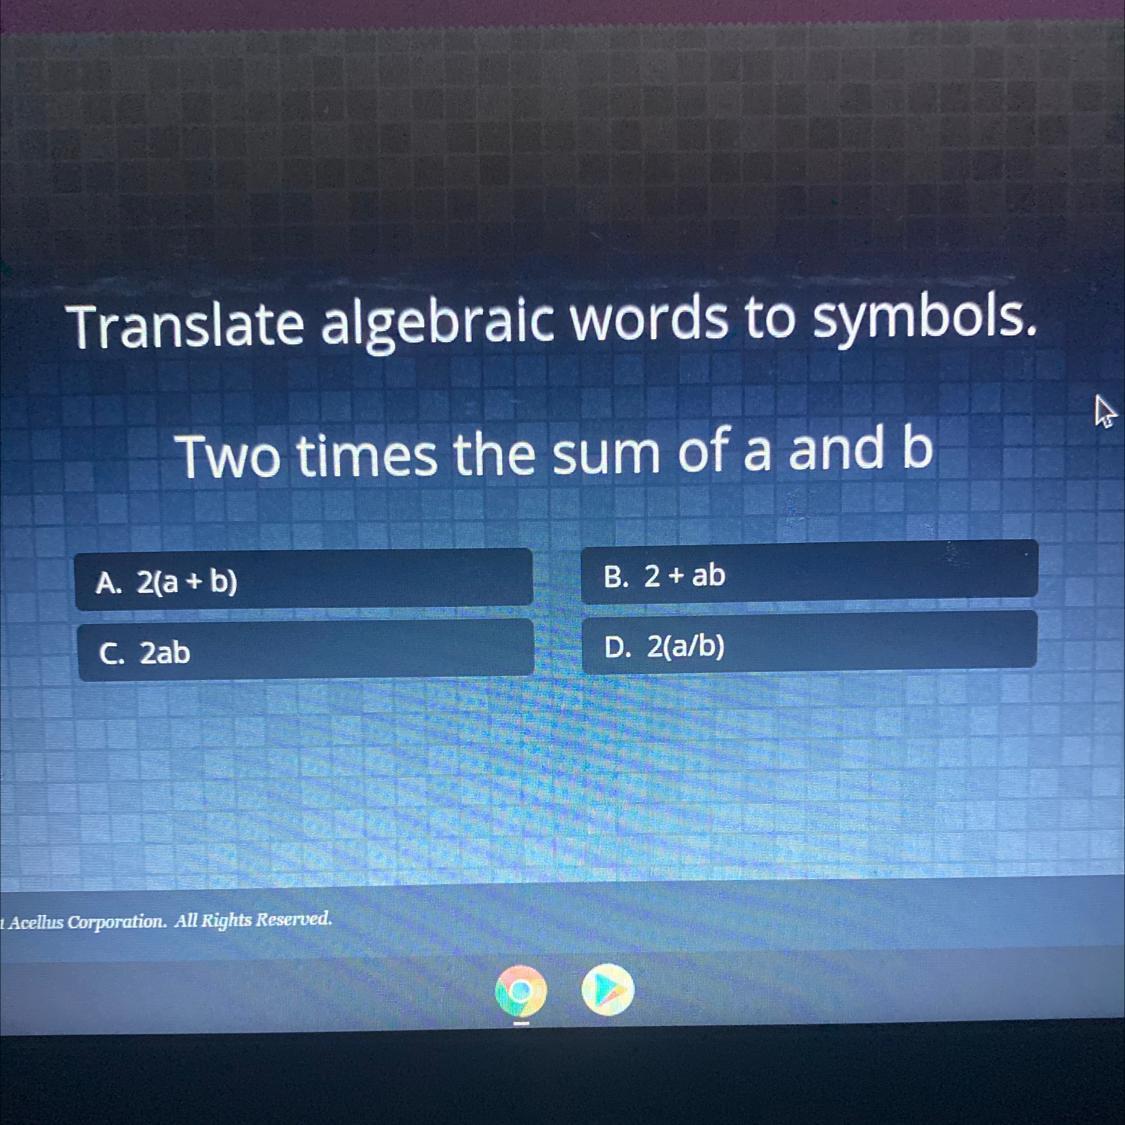 Translate Algebraic Words To Symbols.Two Times The Sum Of A And BA. 2(a + B)B. 2 + AbC. 2abD. 2(a/b)